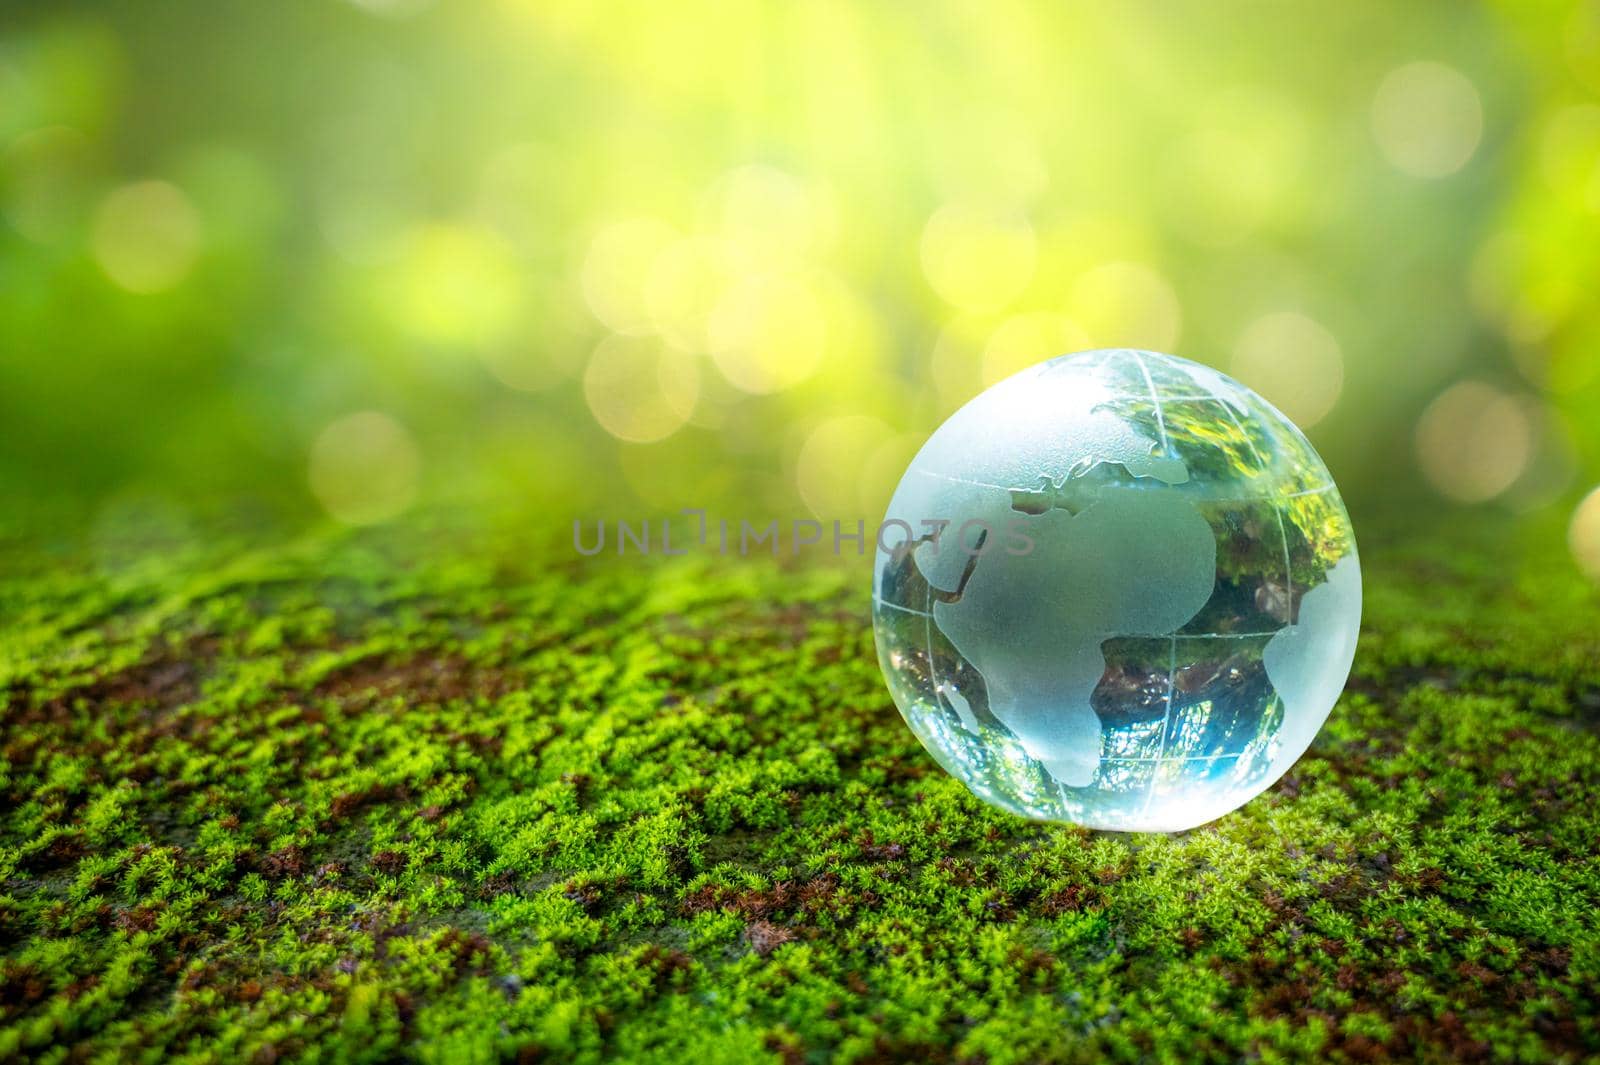 A man with a glass globe Concept day earth Save the world save environment The world is in the grass of the green bokeh background by sarayut_thaneerat